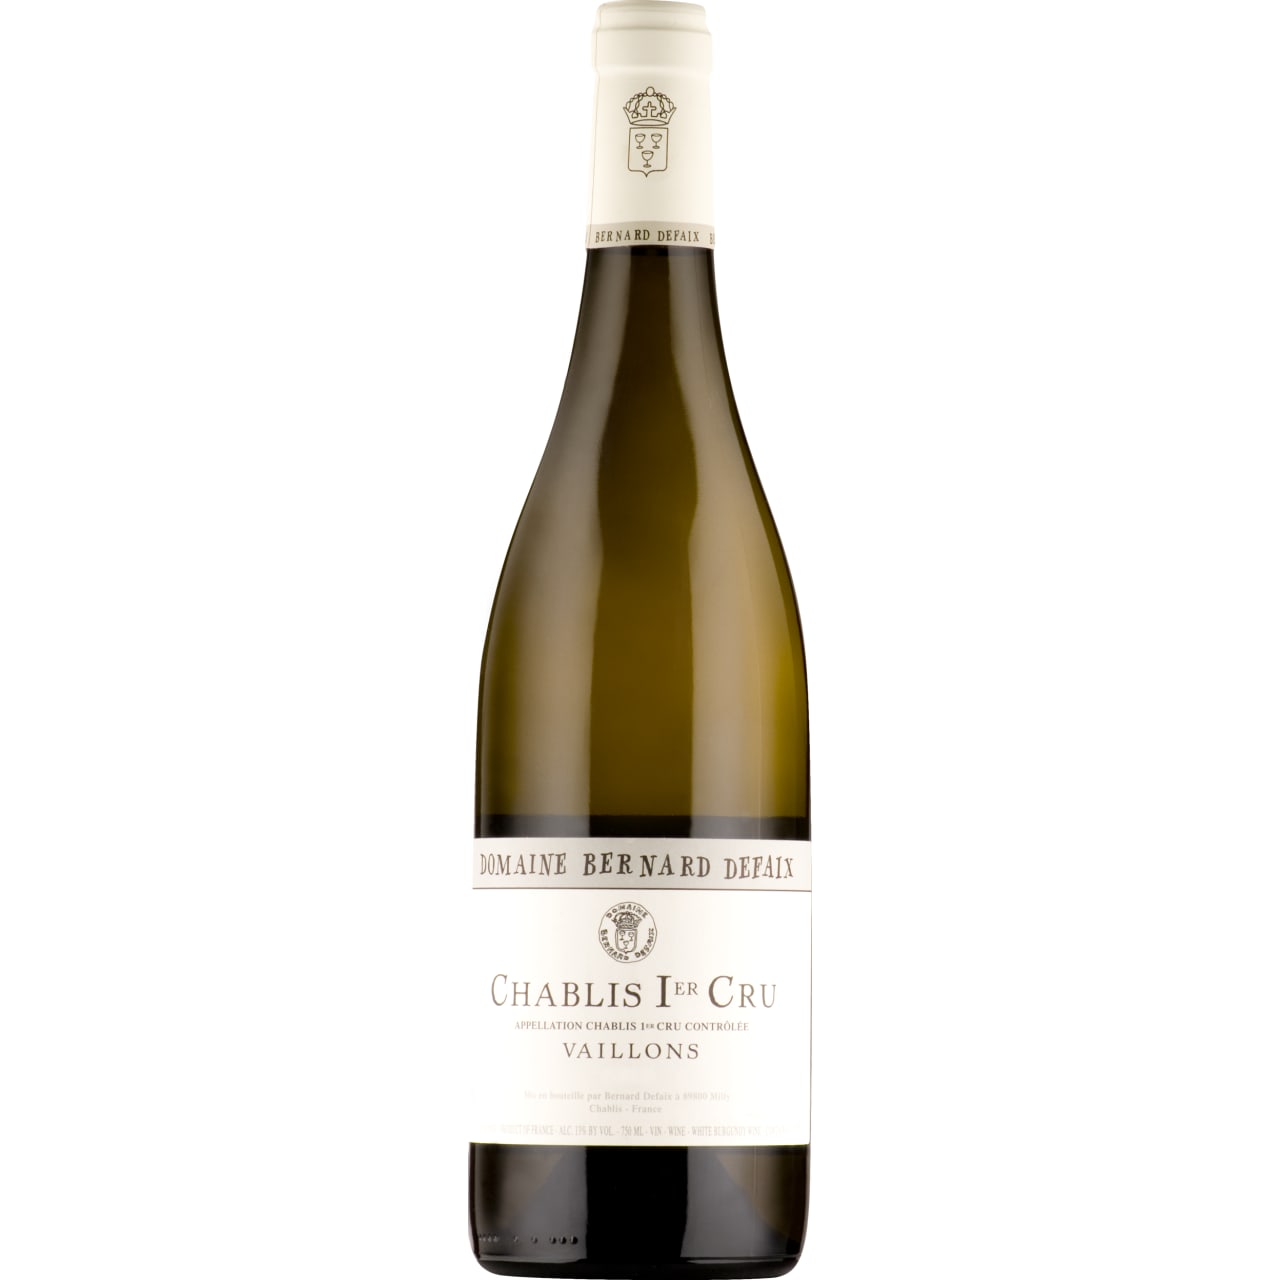 A classy Chablis with all the text book characteristics, the character that sets this Chablis apart is its round edges that make it very aproachable.